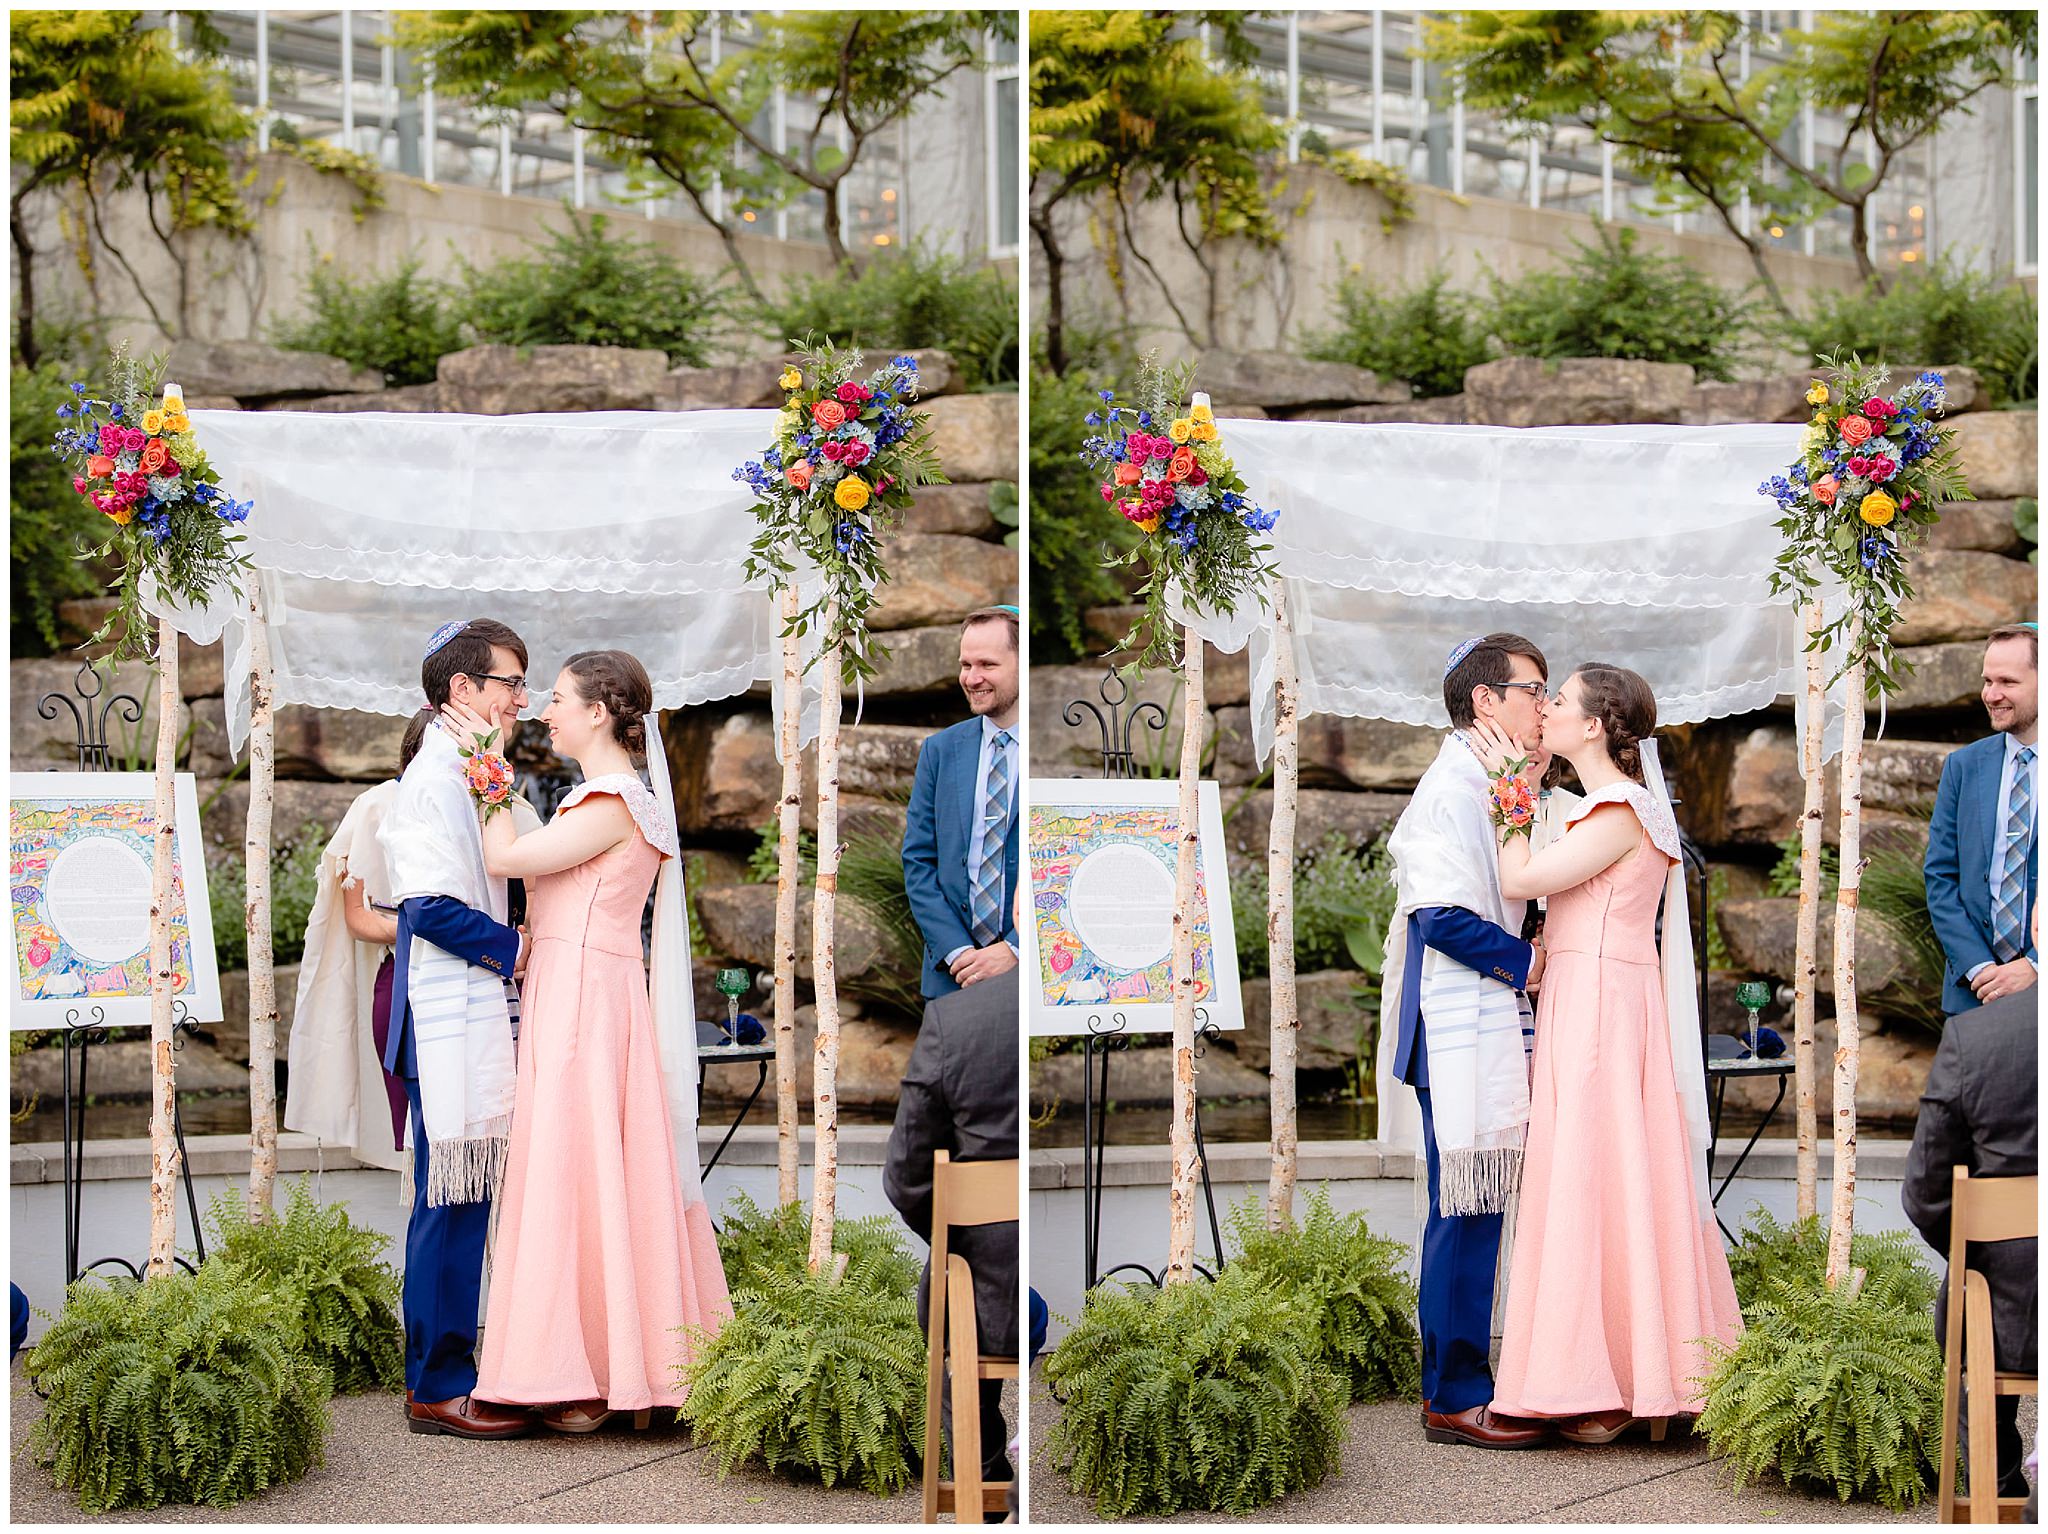 Bride & groom's first kiss at a Jewish wedding at Phipps